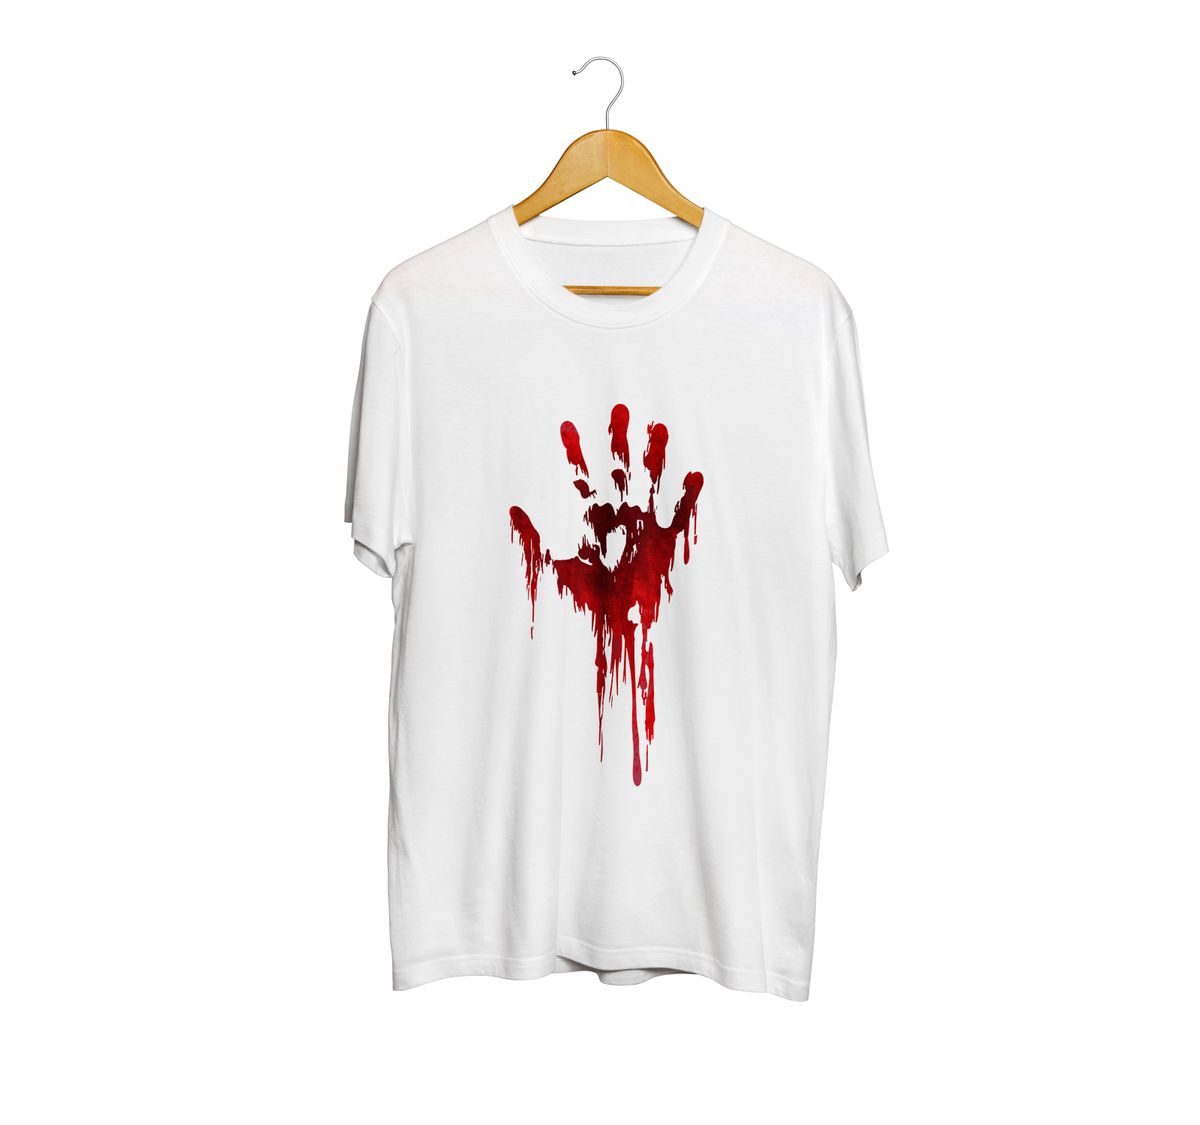 Fan Made Fits White Hand T-Shirt image 1